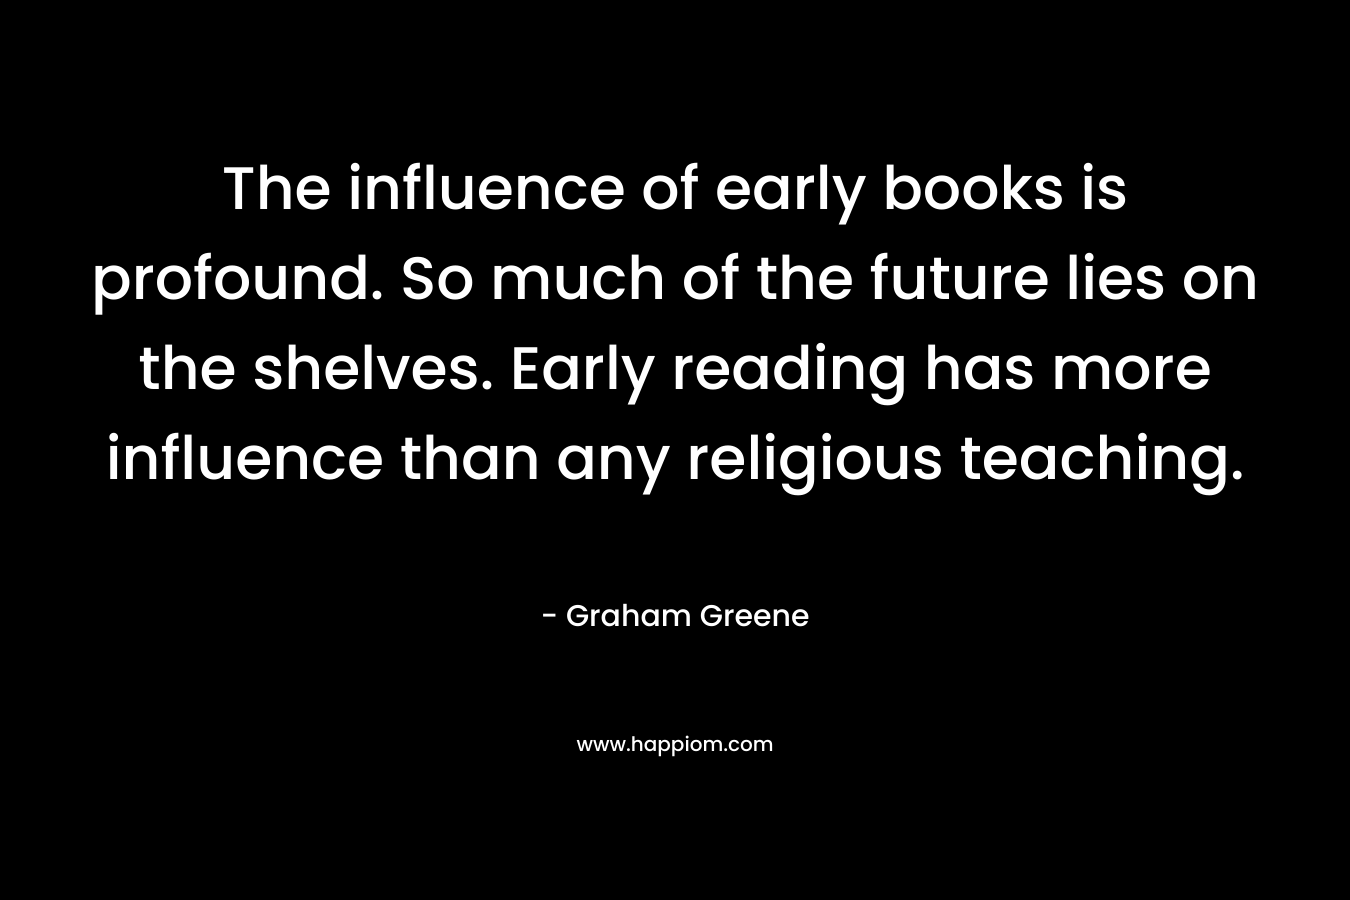 The influence of early books is profound. So much of the future lies on the shelves. Early reading has more influence than any religious teaching. – Graham Greene